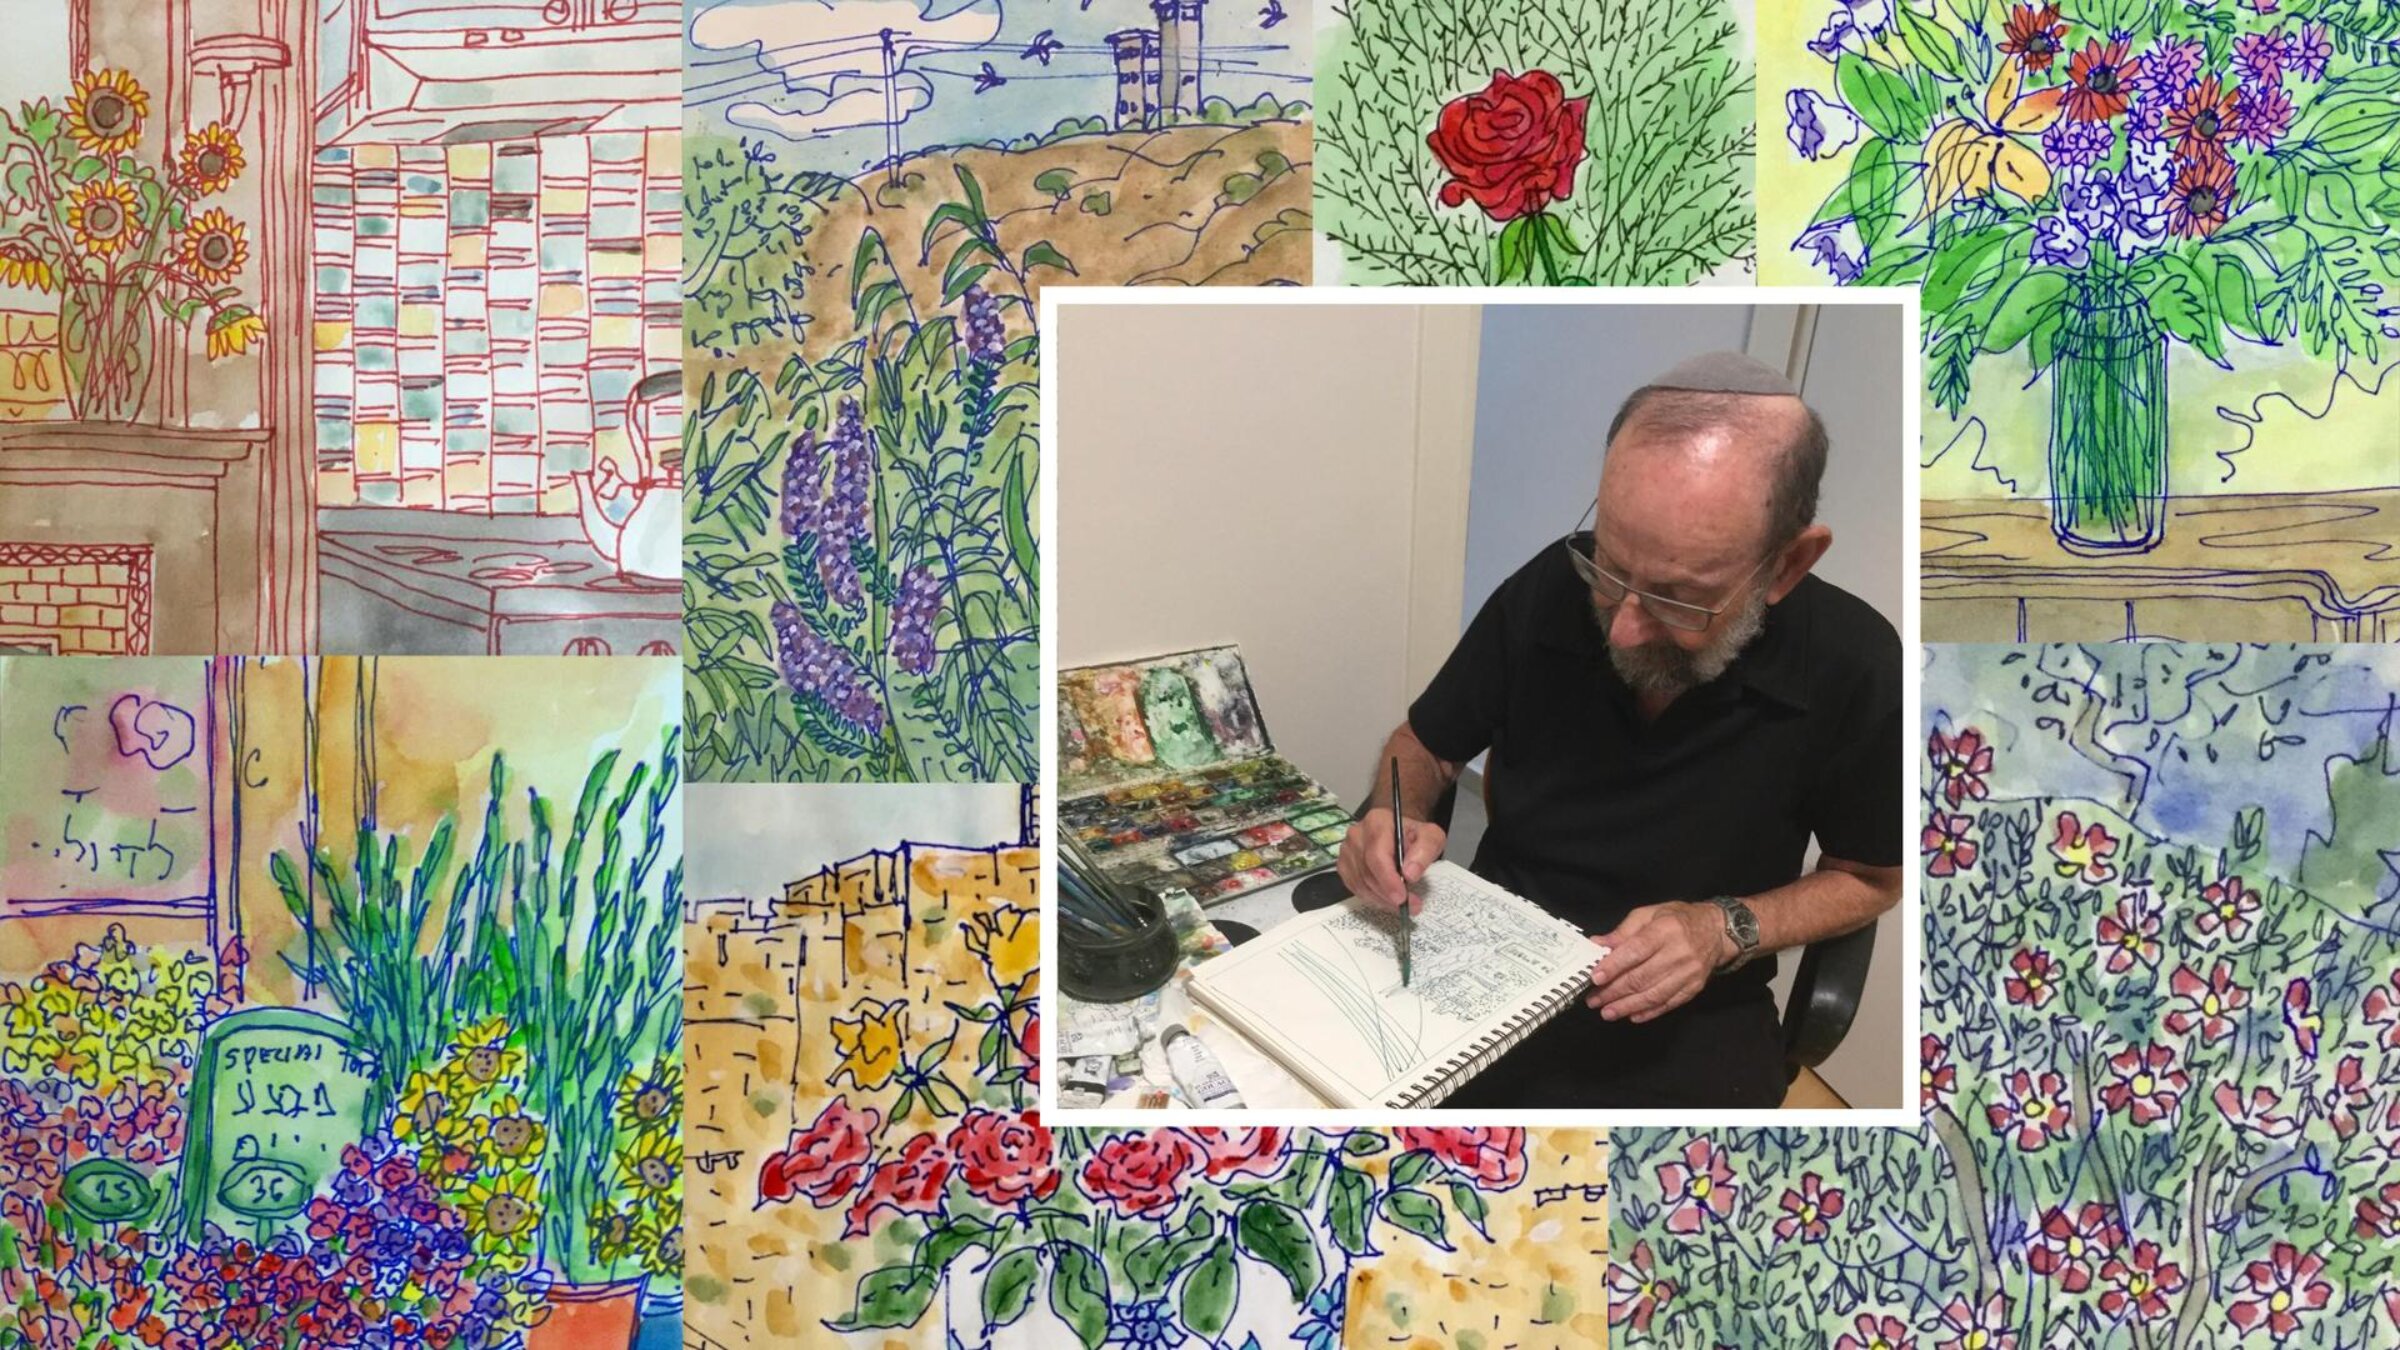 Reuven Dattner, 79, drawing in his home in Petah Tikva, and some of the 500-plus "Flowers for Shabbat" artworks he has created every week for a decade.